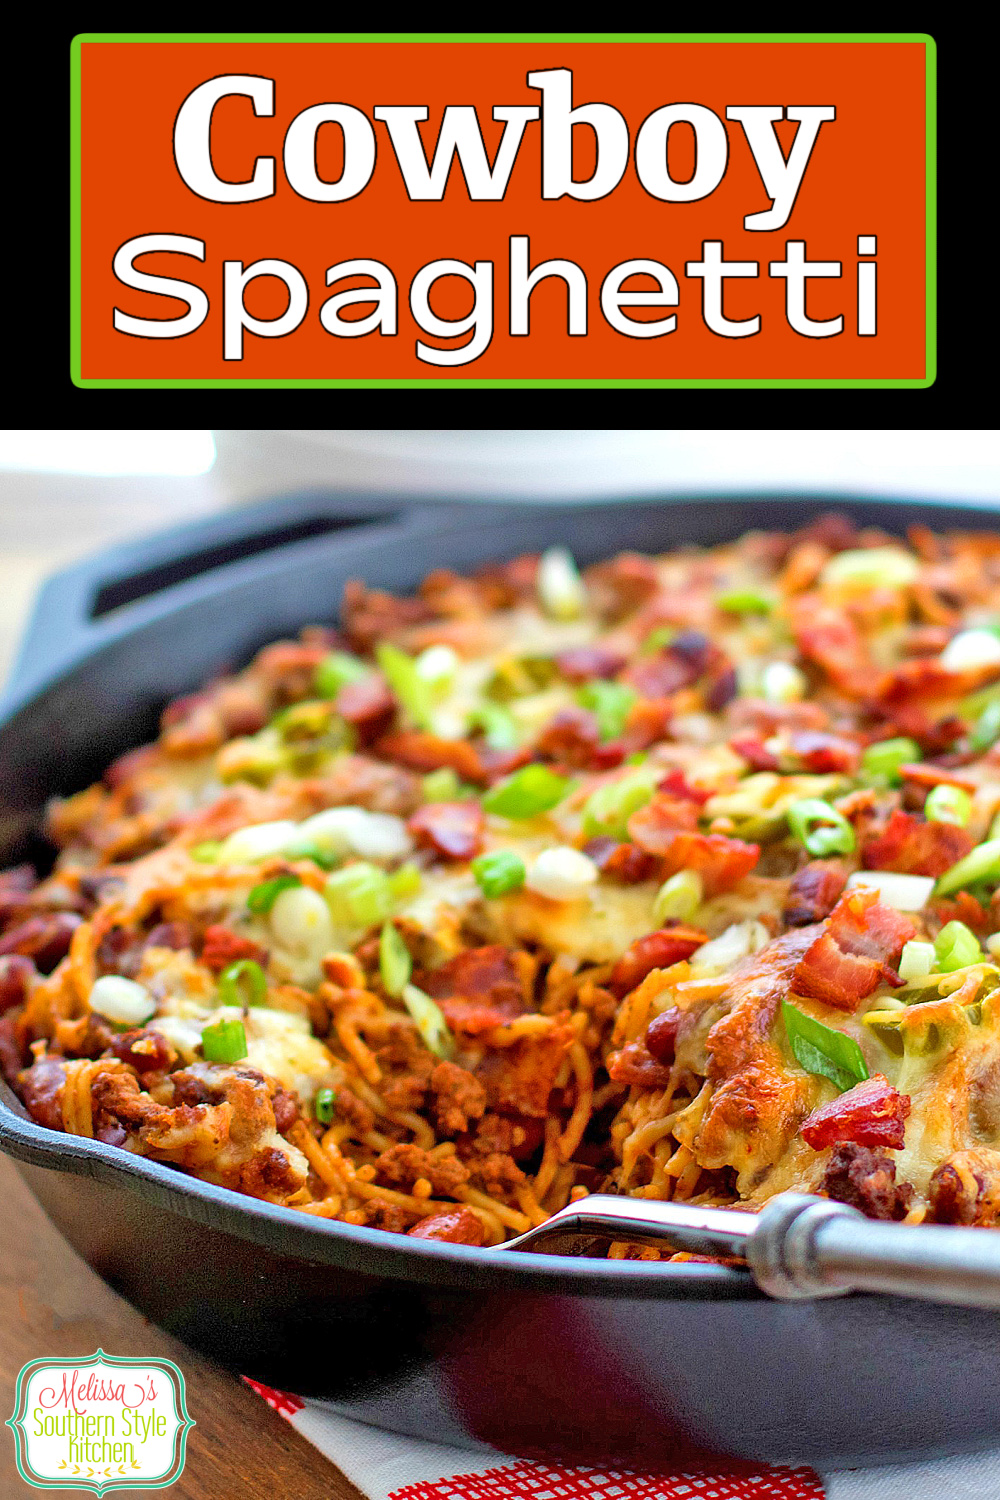 Bring the heat to dinner with this Cowboy Spaghetti #spaghetti #cowboyspaghetti #pasta #chili #dinner #dinnerideas #skilletmeals #southernfood #southernrecipes #groundbeefrecipes #southernfood #southernrecipes #easydinnerrecipes #easygroundbeefrecipes via @melissasssk